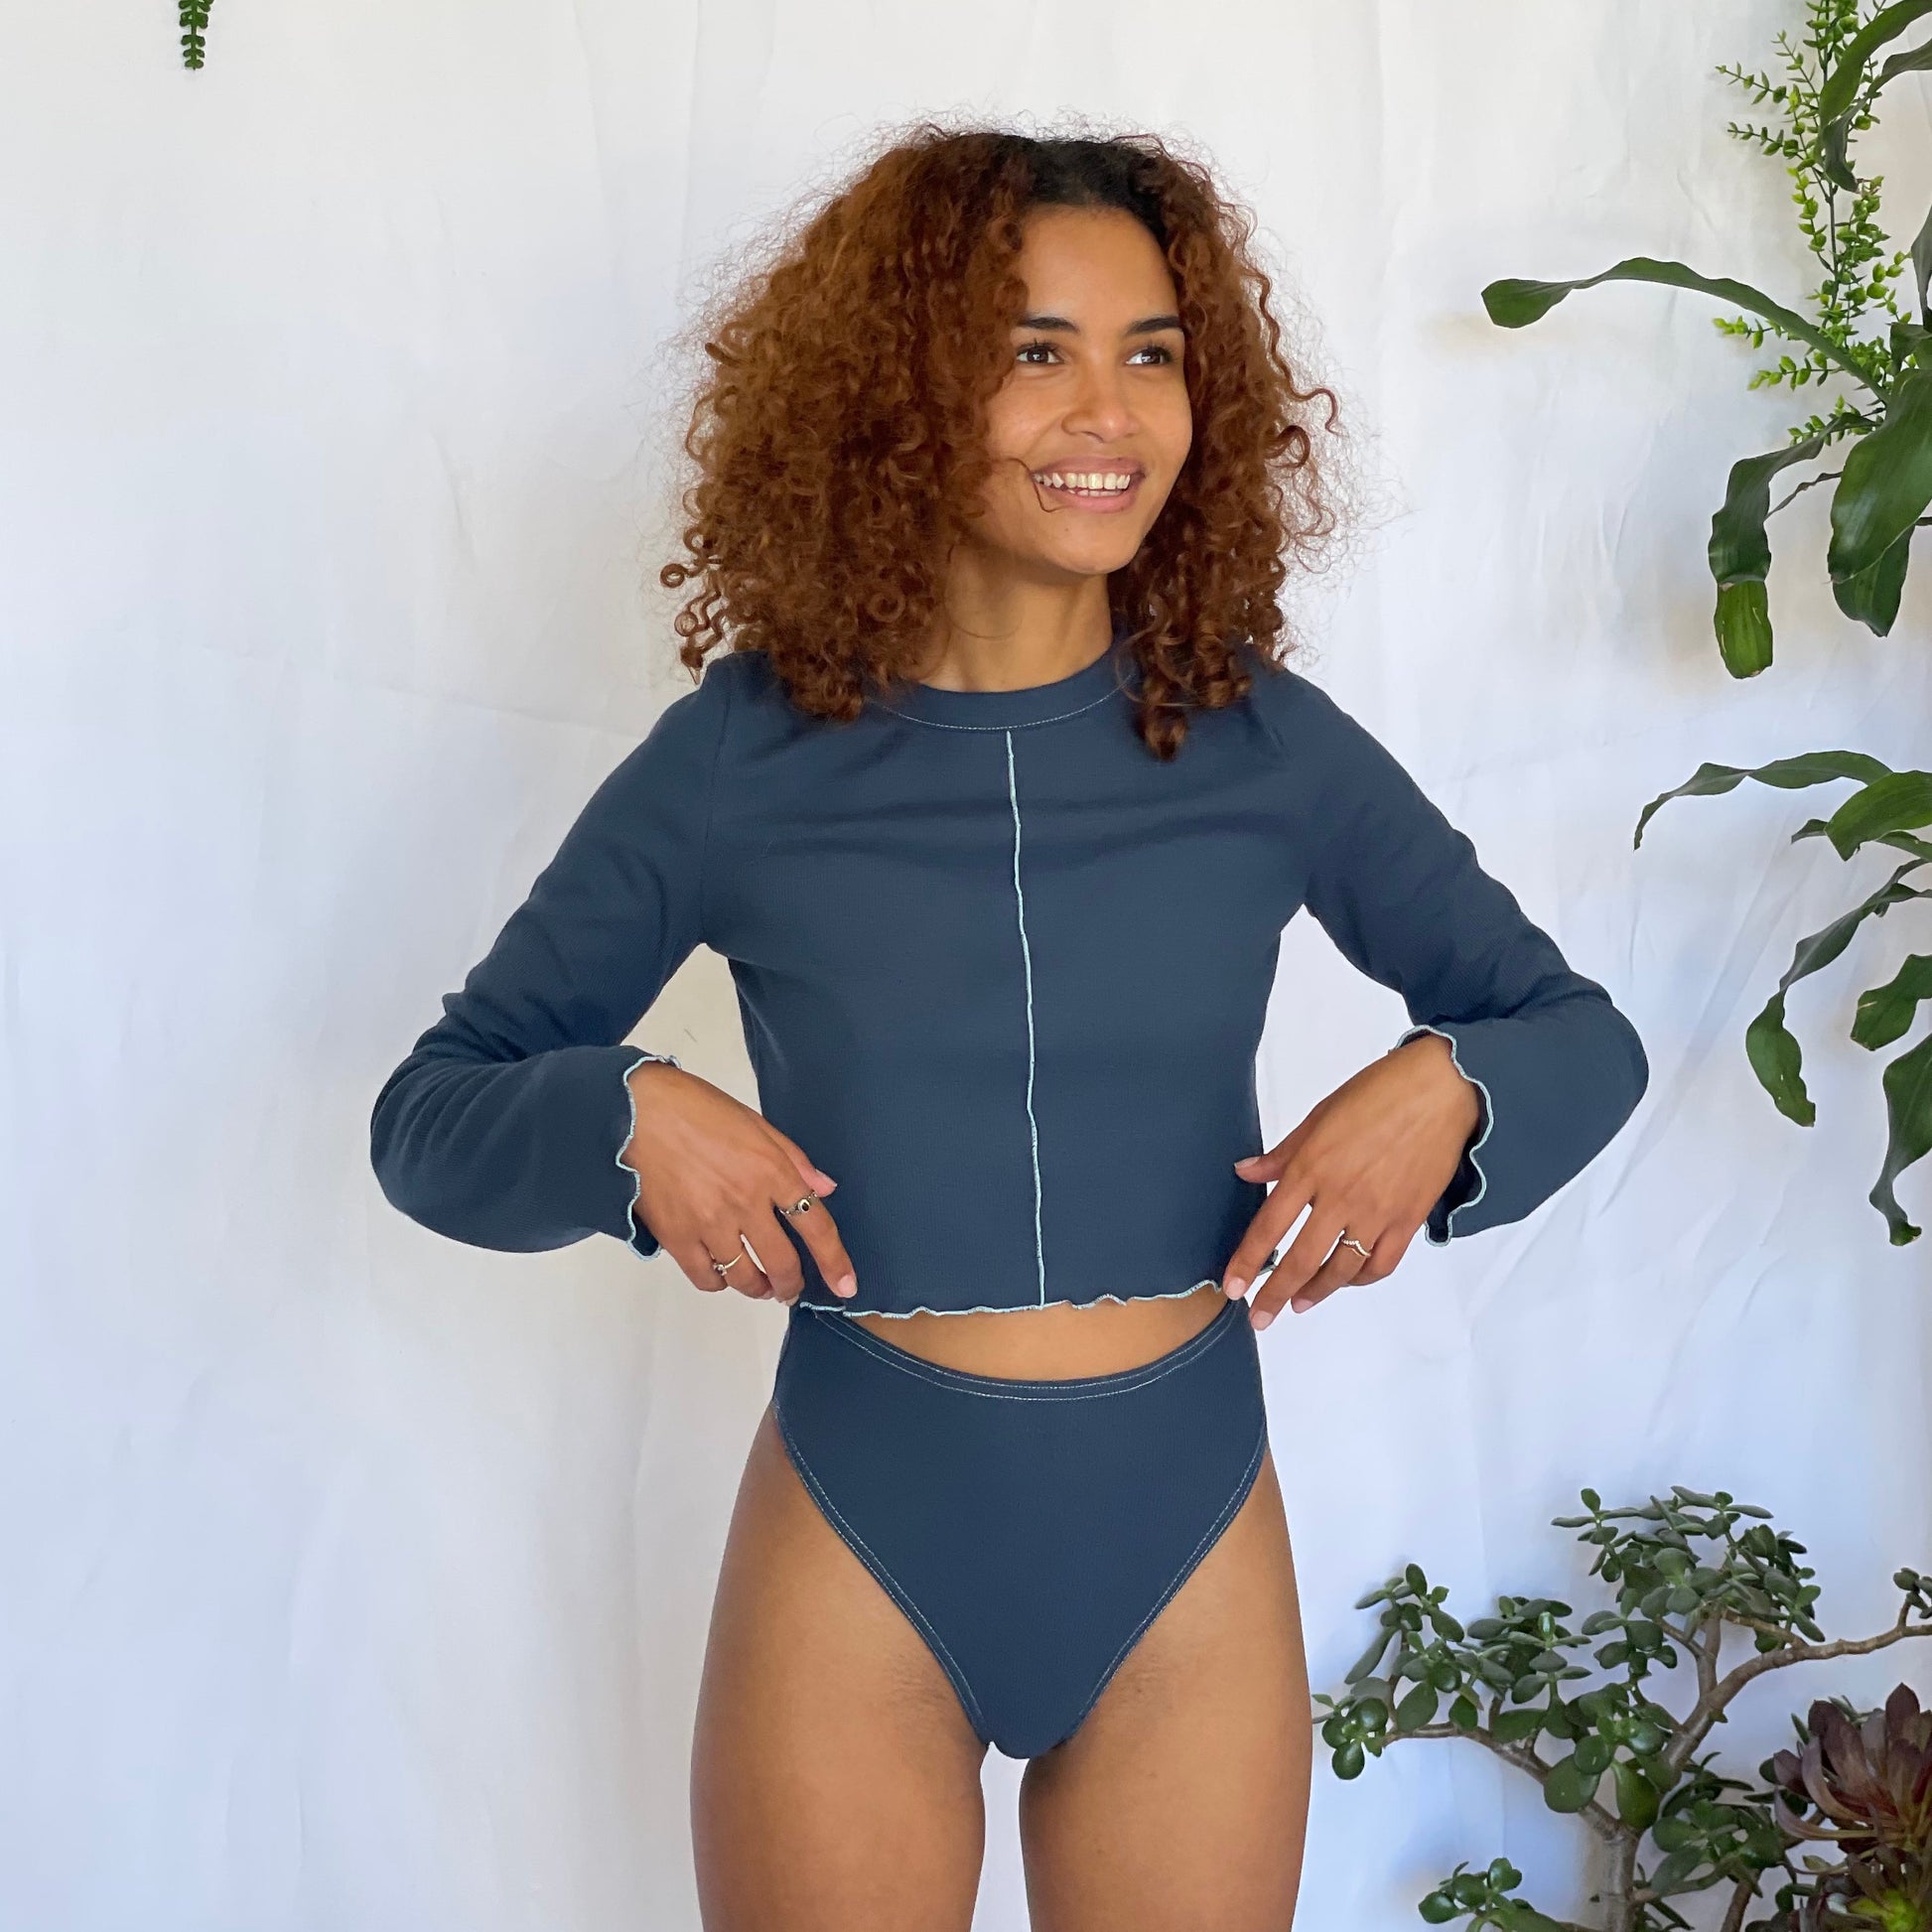 Model wears a navy blue underwear and long sleeve top on a white back drop with foliage. 